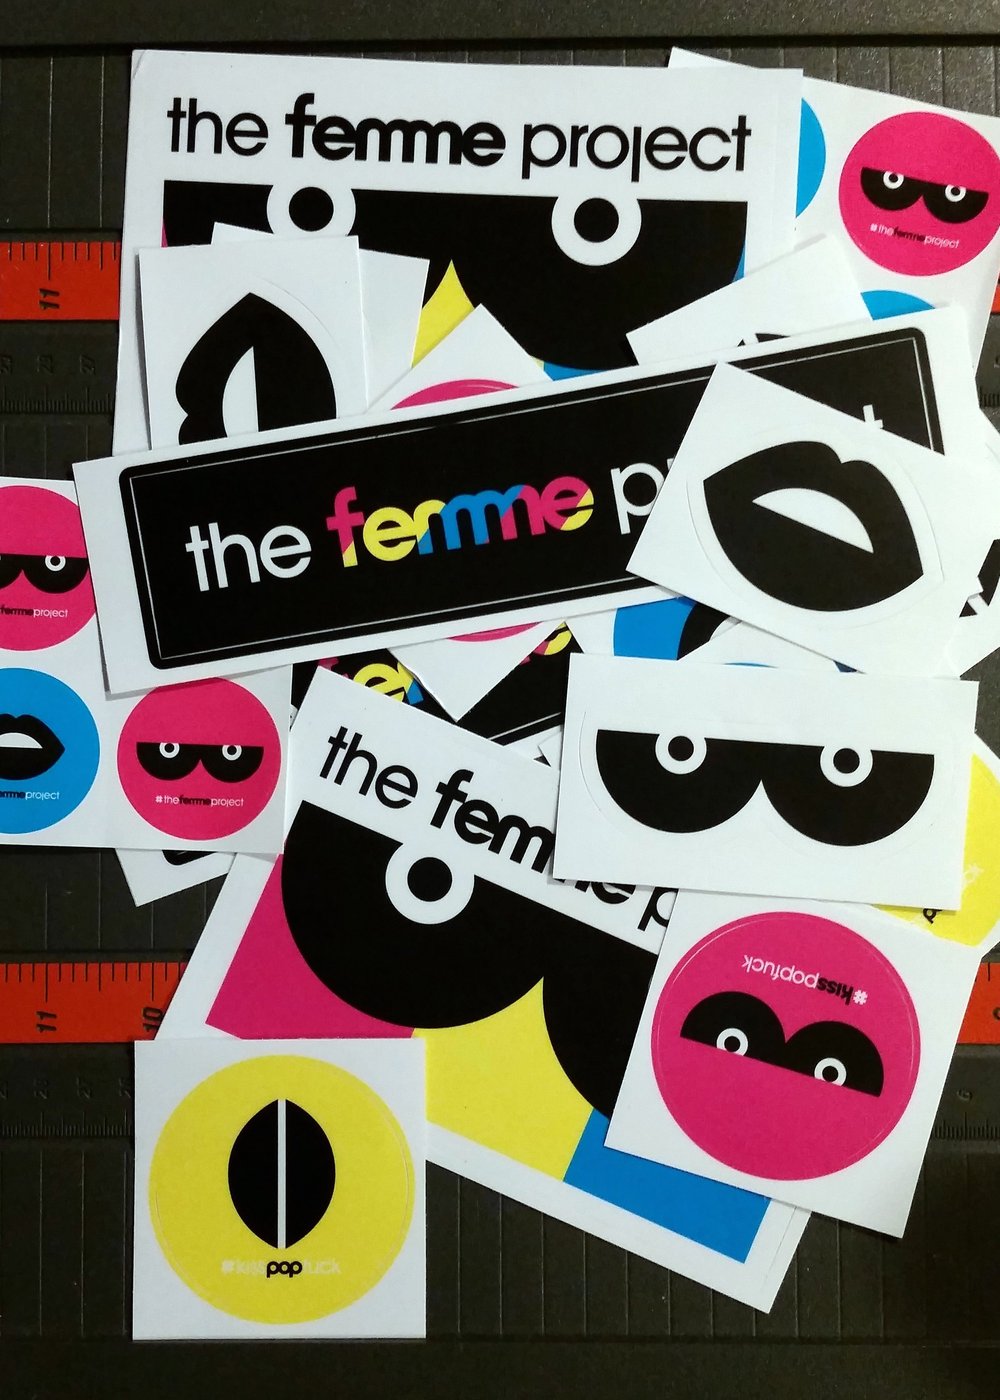  Spreading the Femme project brand with the first edition of stickers. 